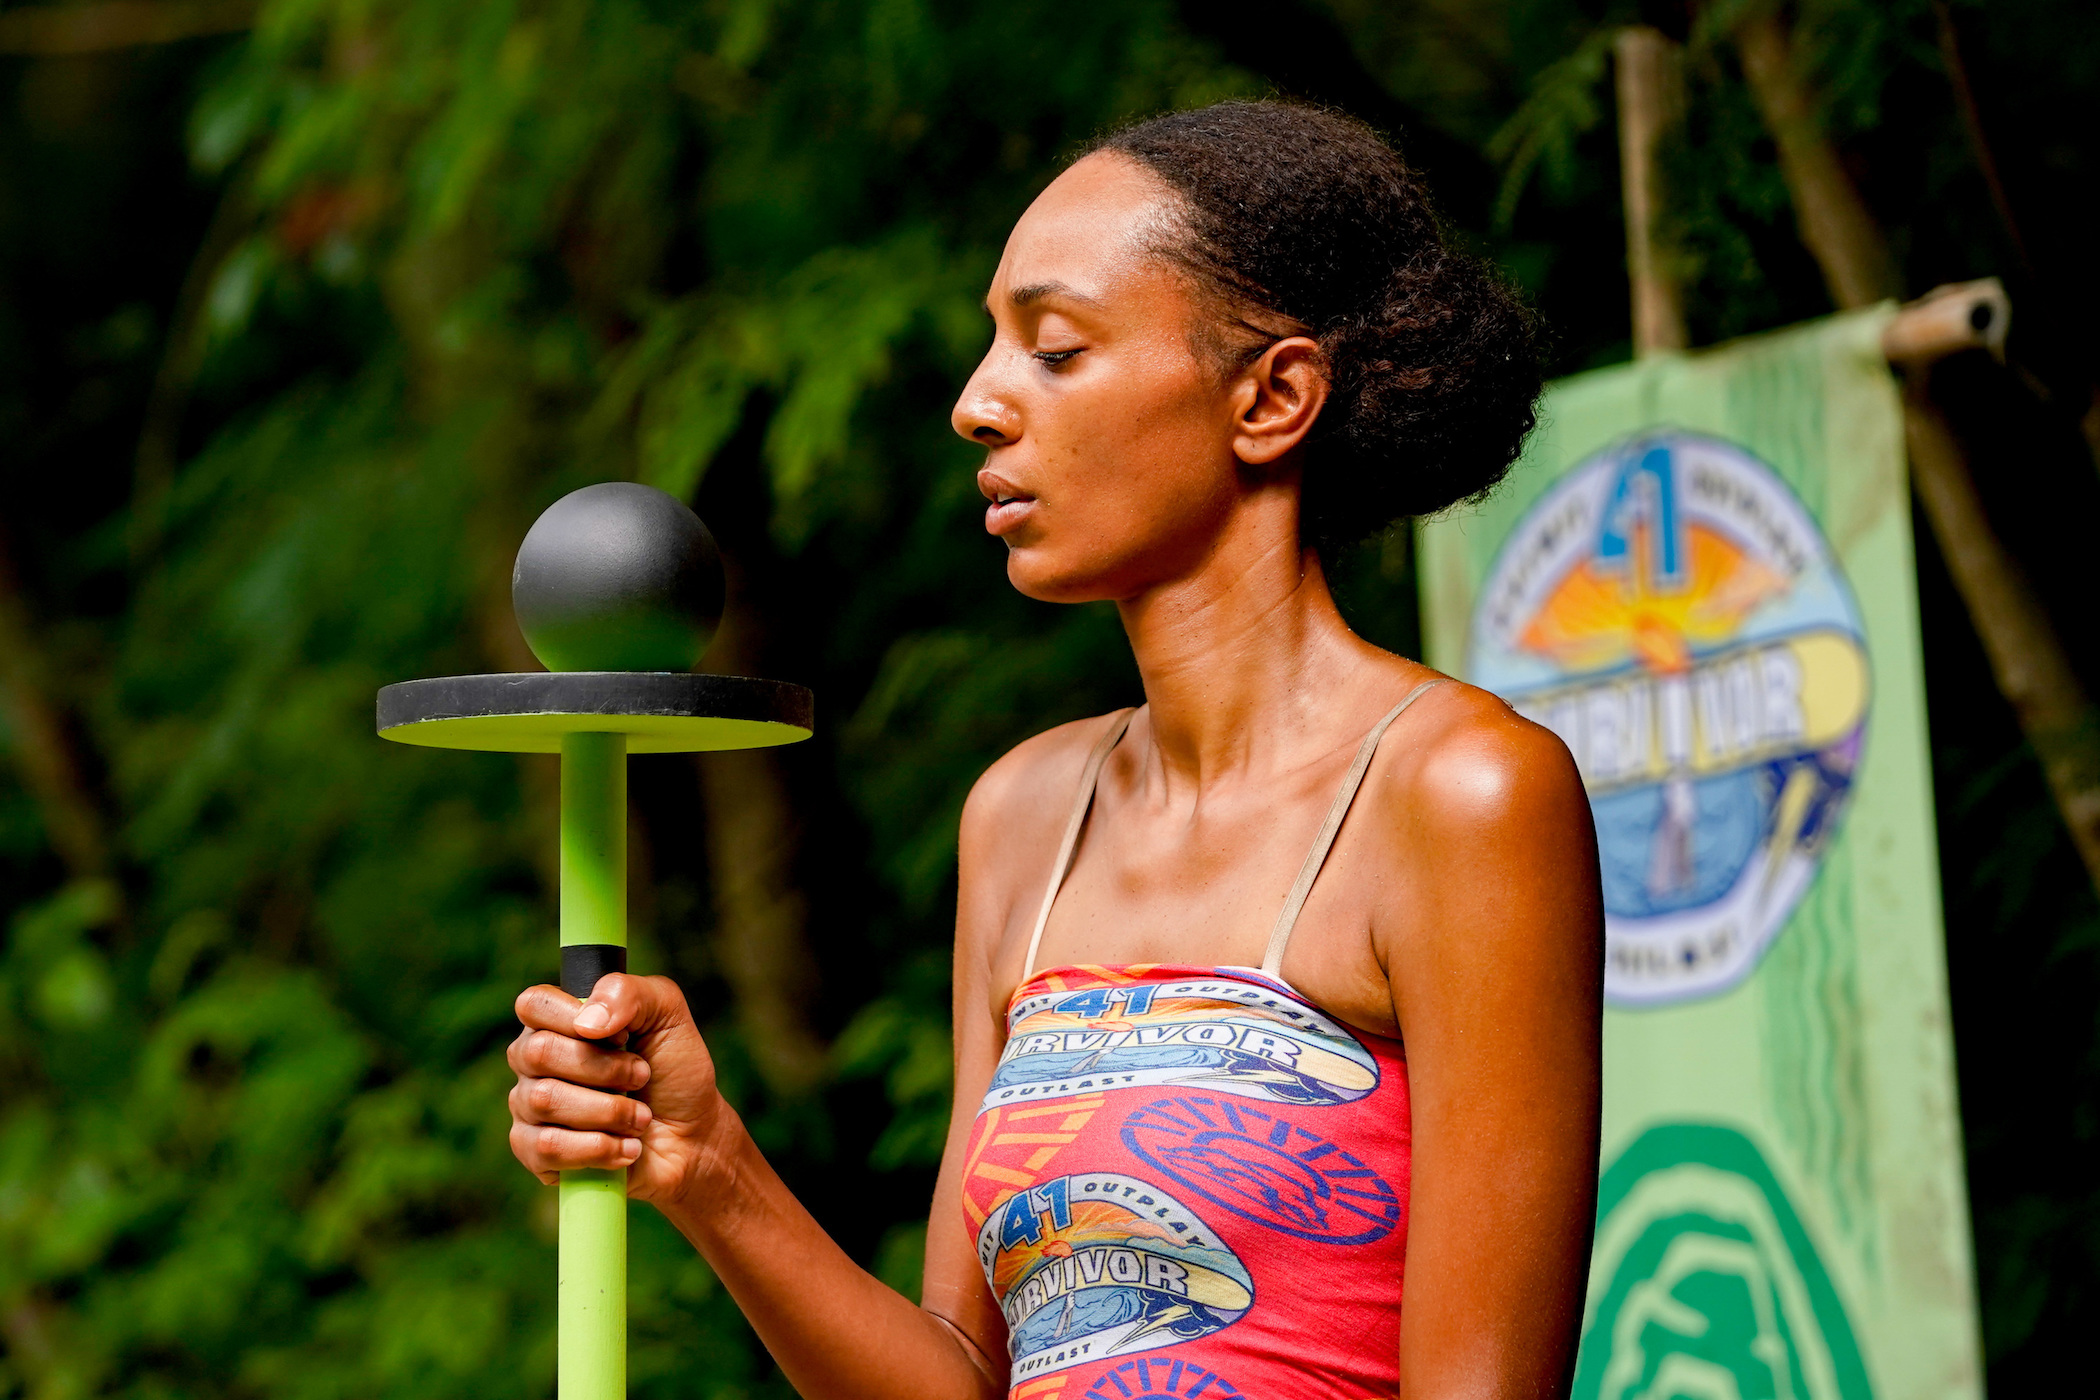 A close-up of Shan competing during the immunity challenge on 'Survivor' Season 41. 'Survivor' Season 41 spoilers note Shan gets eliminated in episode 10.